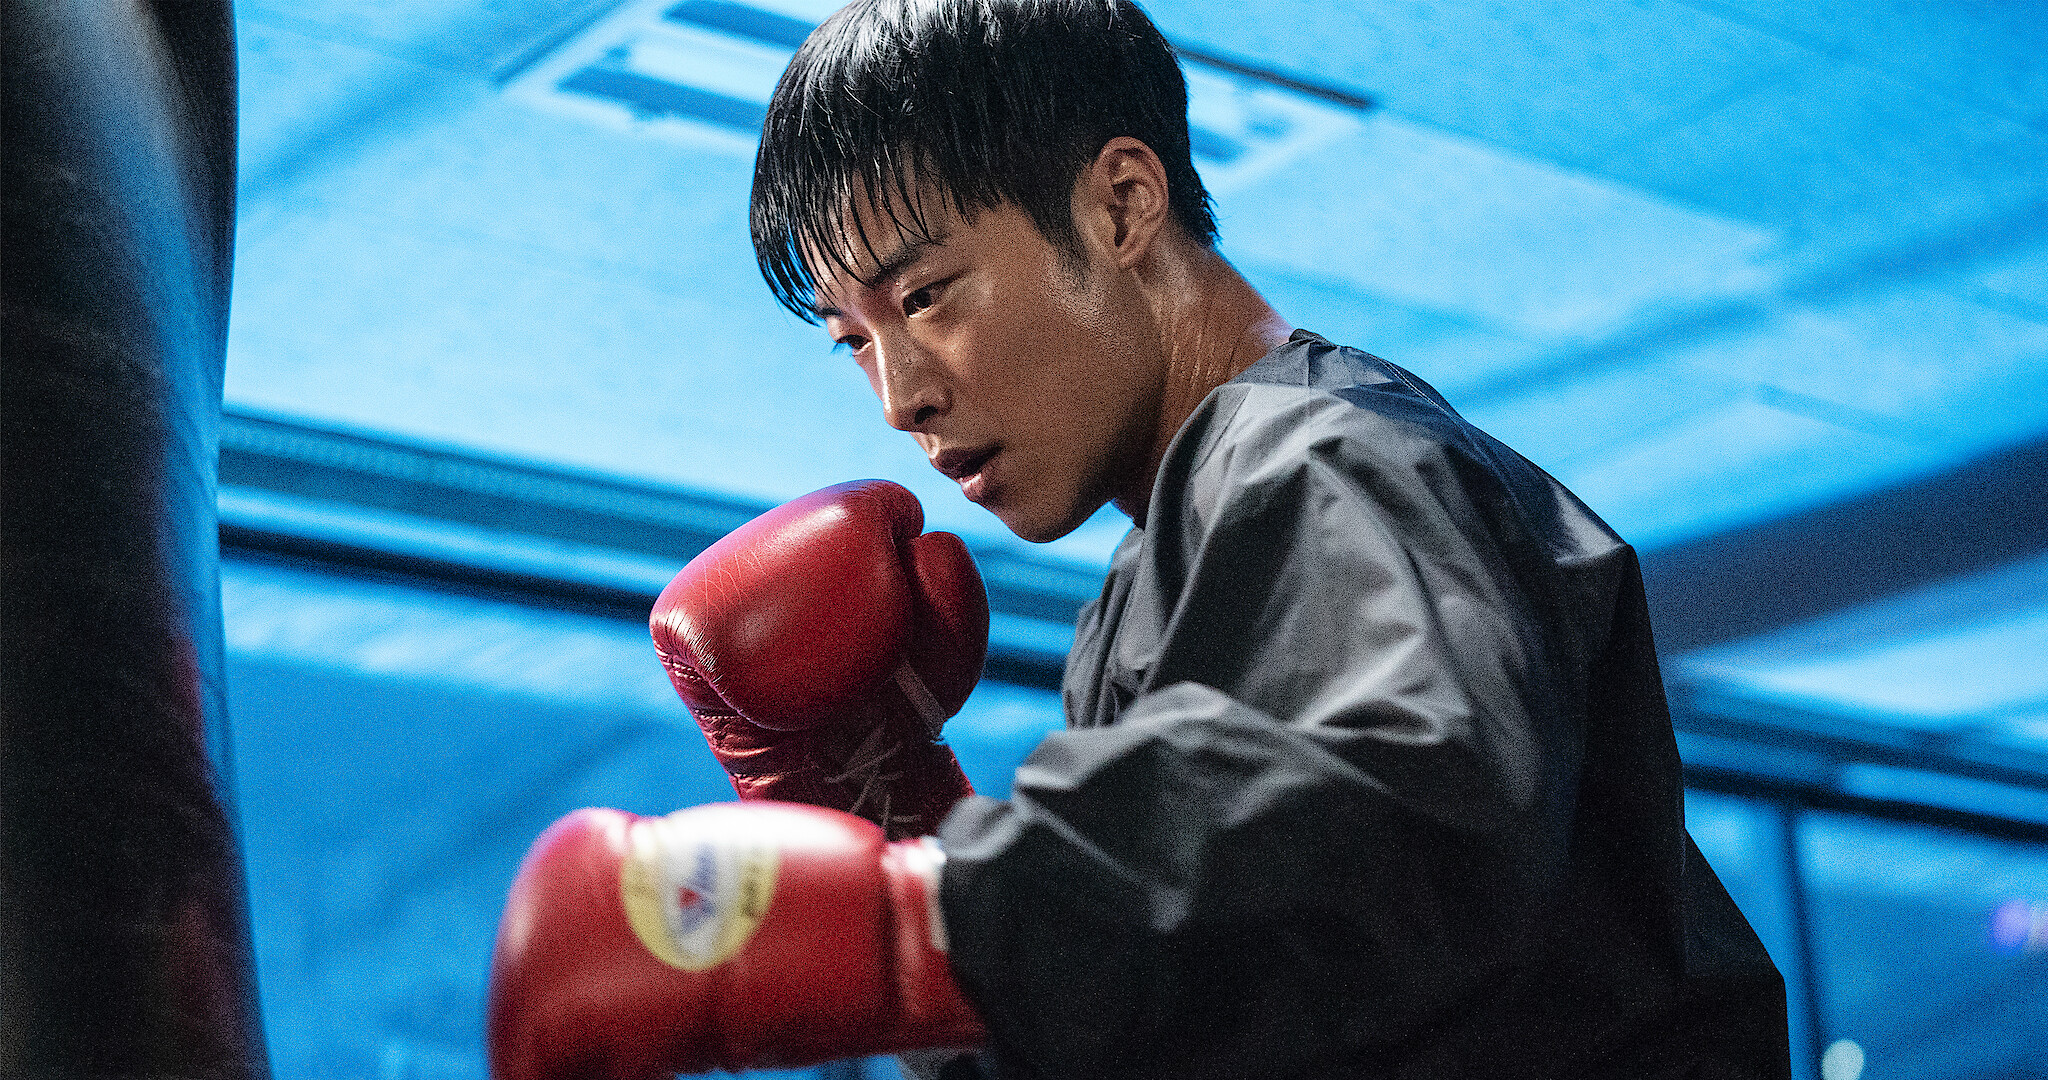 Bloodhounds, What You Need to Know About the Korean Action Thriller K-Drama Series picture pic